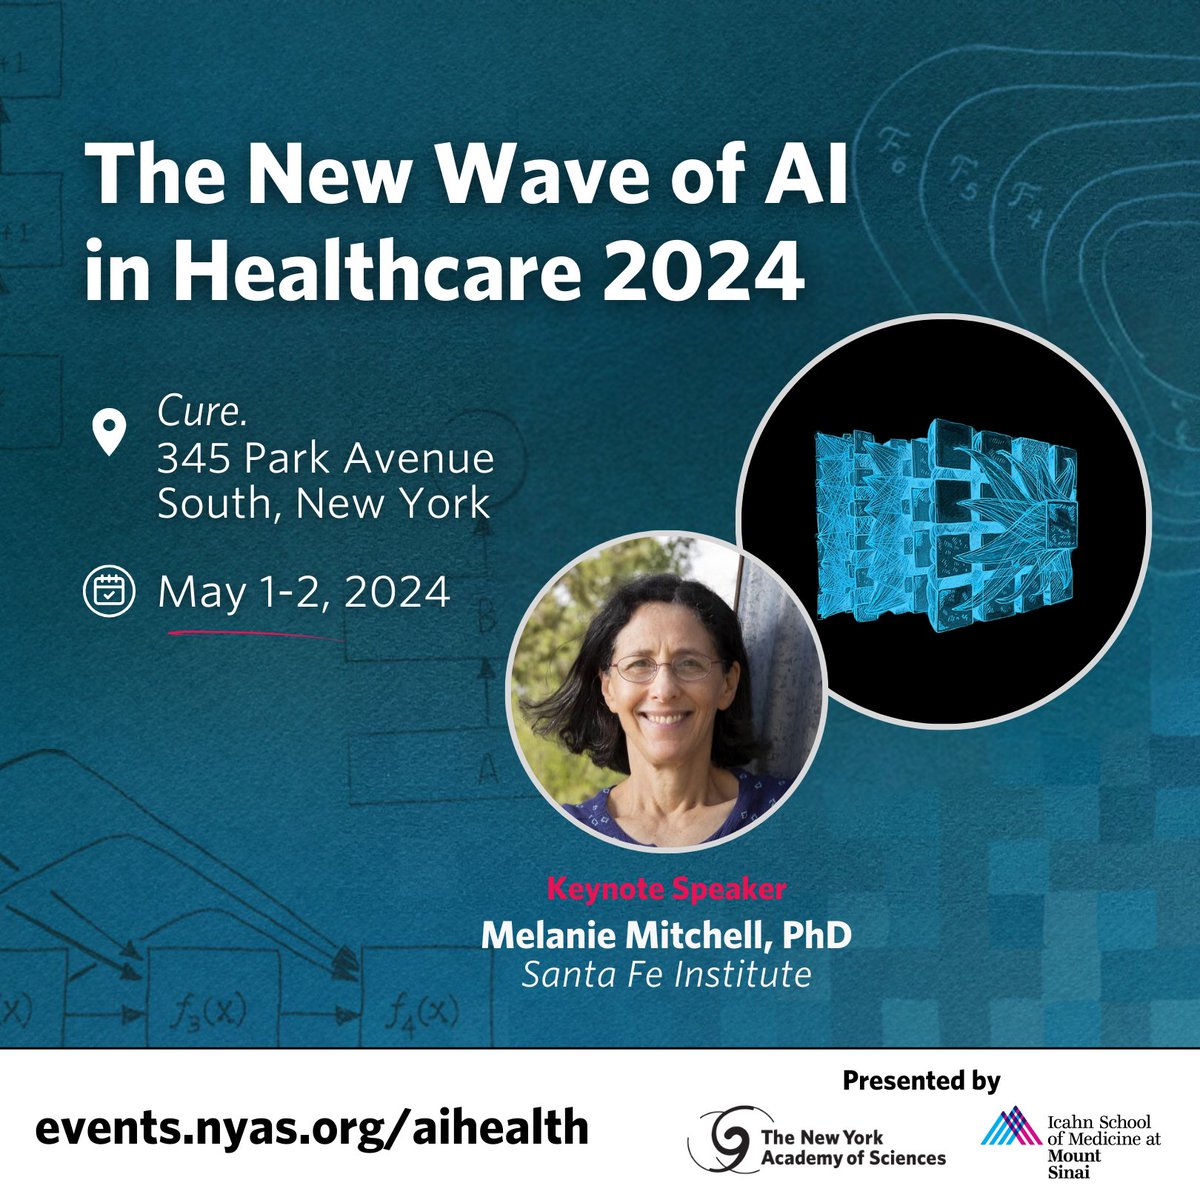 What are the leading minds in machine learning and medicine working on? Join the conversation at The New Wave of AI in Healthcare 2024 on May 1 & 2. Tickets are selling fast — register today! #NewWaveAIHealth @IcahnMountSinai @NYASciences 

🎟️: events.nyas.org/aihealth